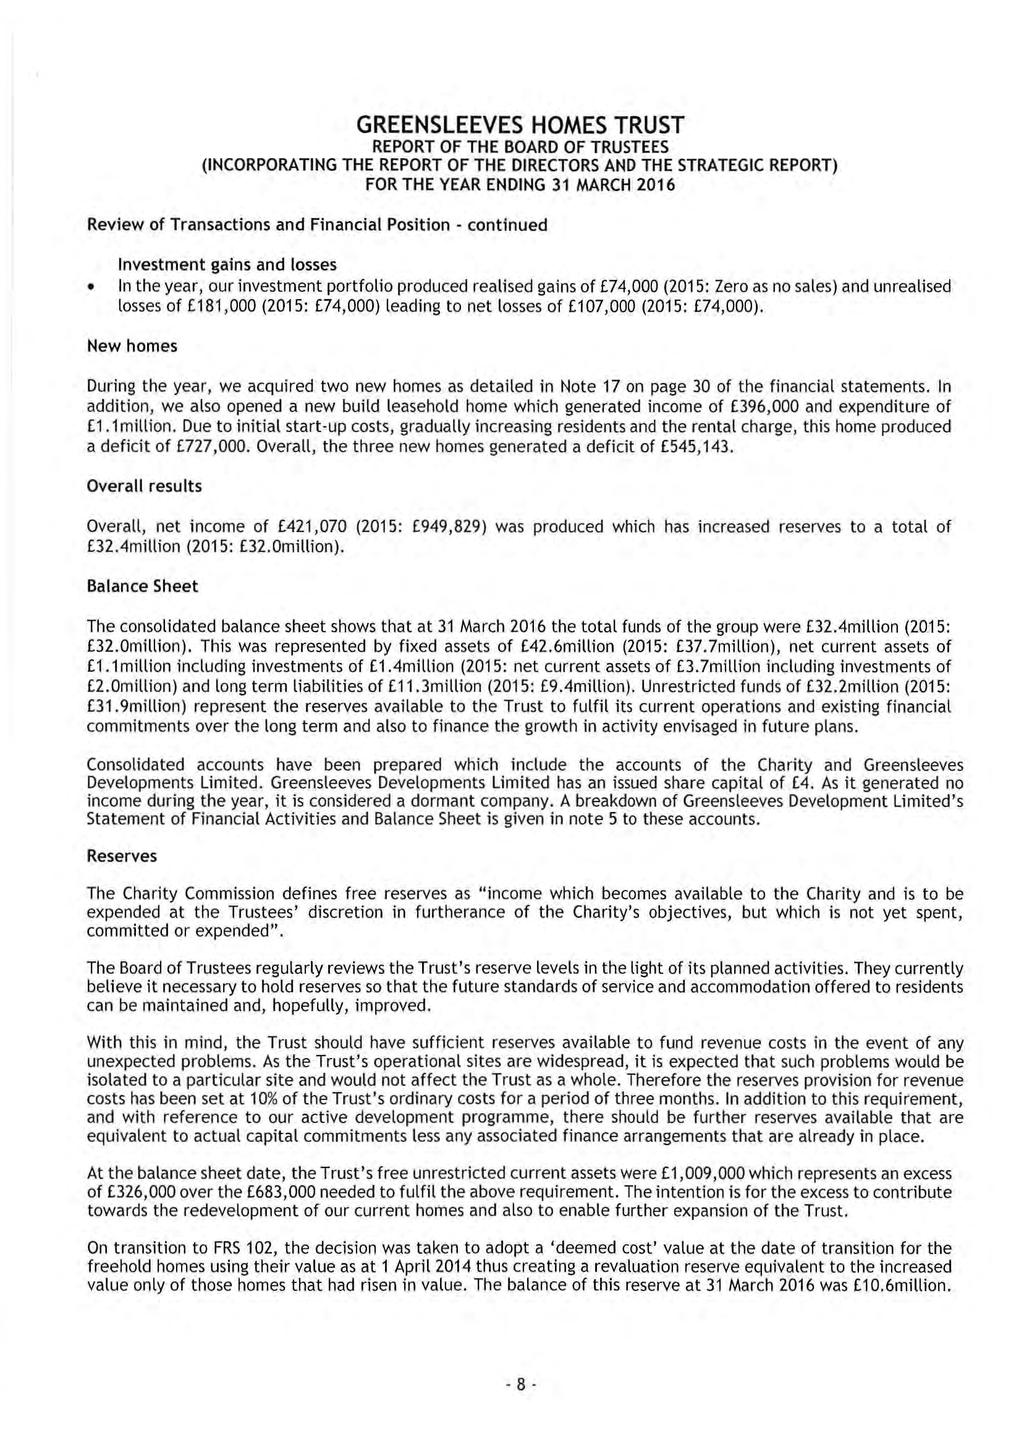 GREENSLEEVES HOMES TRUST REPORT OF THE BOARD OF TRUSTEES (INCORPORATING THE REPORT OF THE DIRECTORS AND THE STRATEGIC REPORT) FOR THE YEAR ENDING 31 MARCH 2016 Review of Transactions and Financial